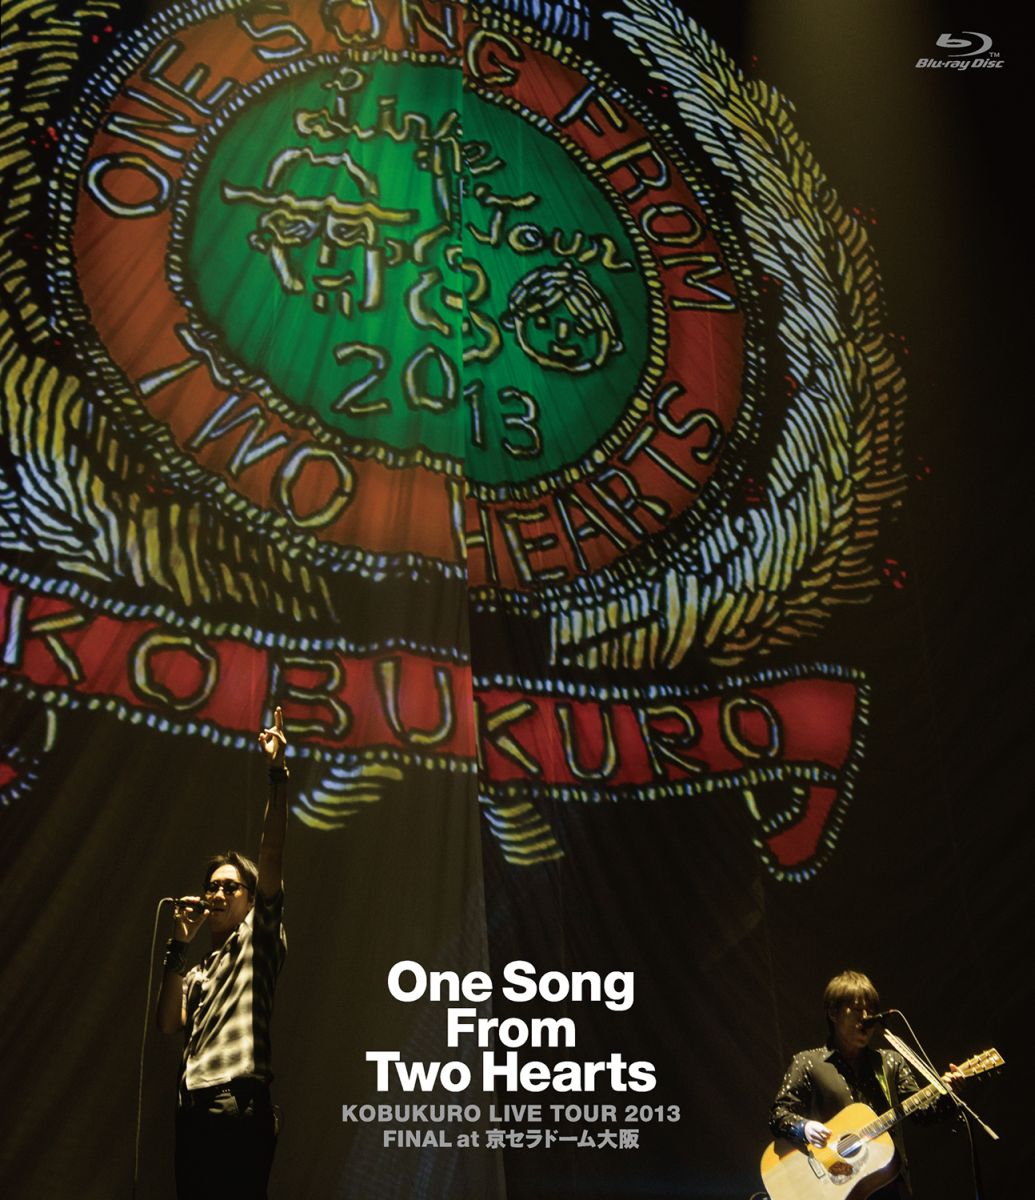 KOBUKURO LIVE TOUR 2013 “One Song From Two Hearts” FINAL at 京セラドーム大阪 【Blu-ray】画像